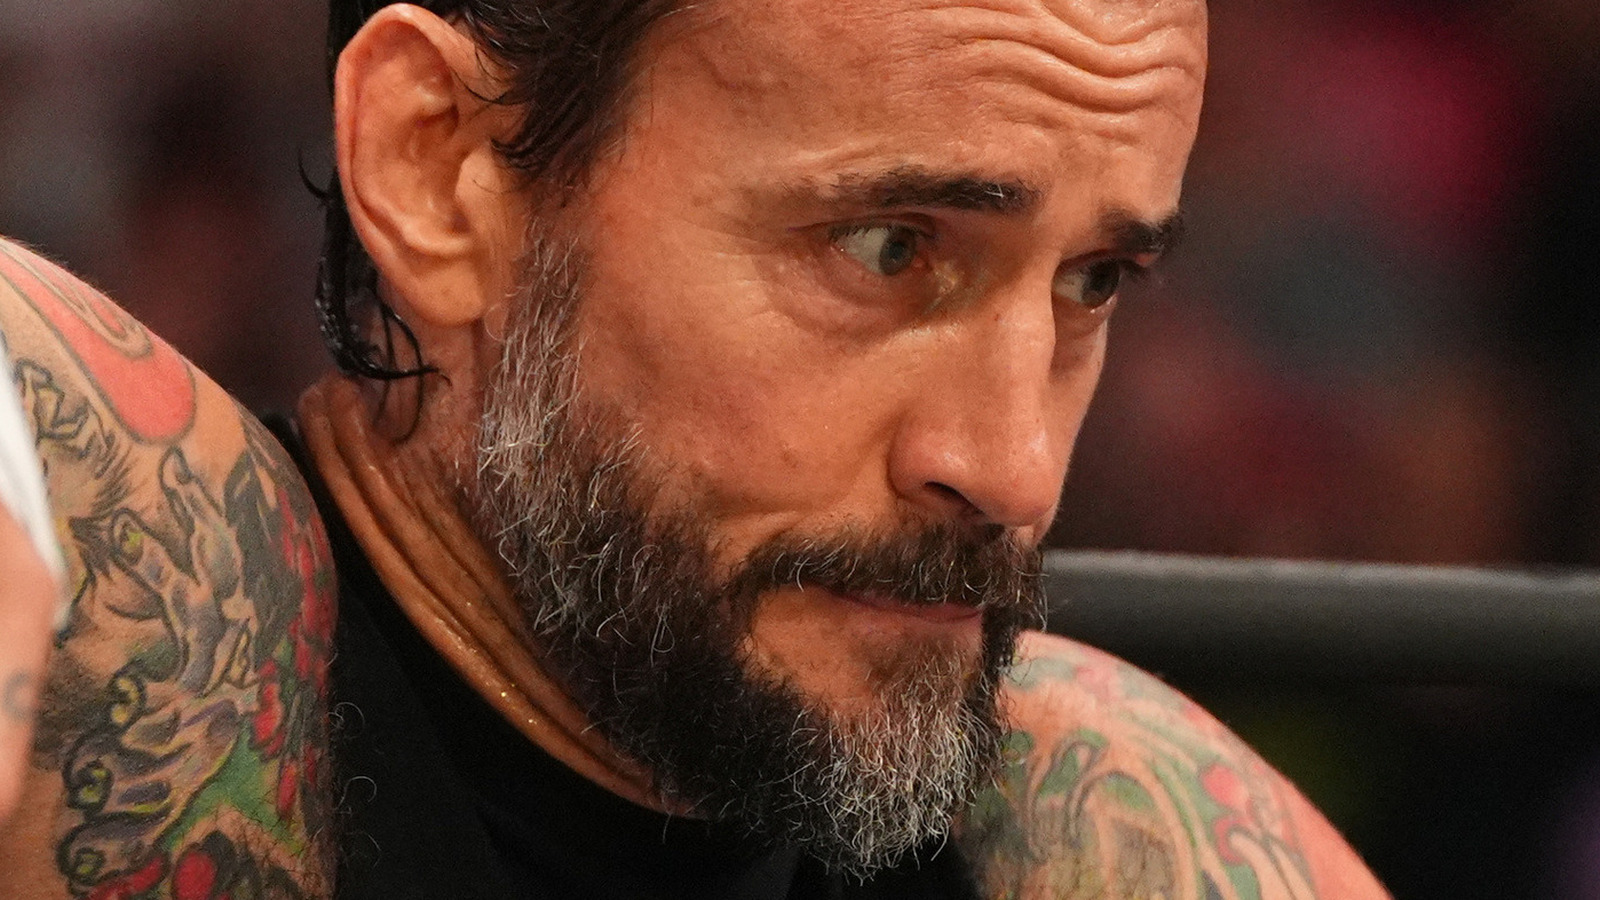 Cm Punk Takes Shot At Fellow Aew Star Hangman Adam Page In Post Collision Promo